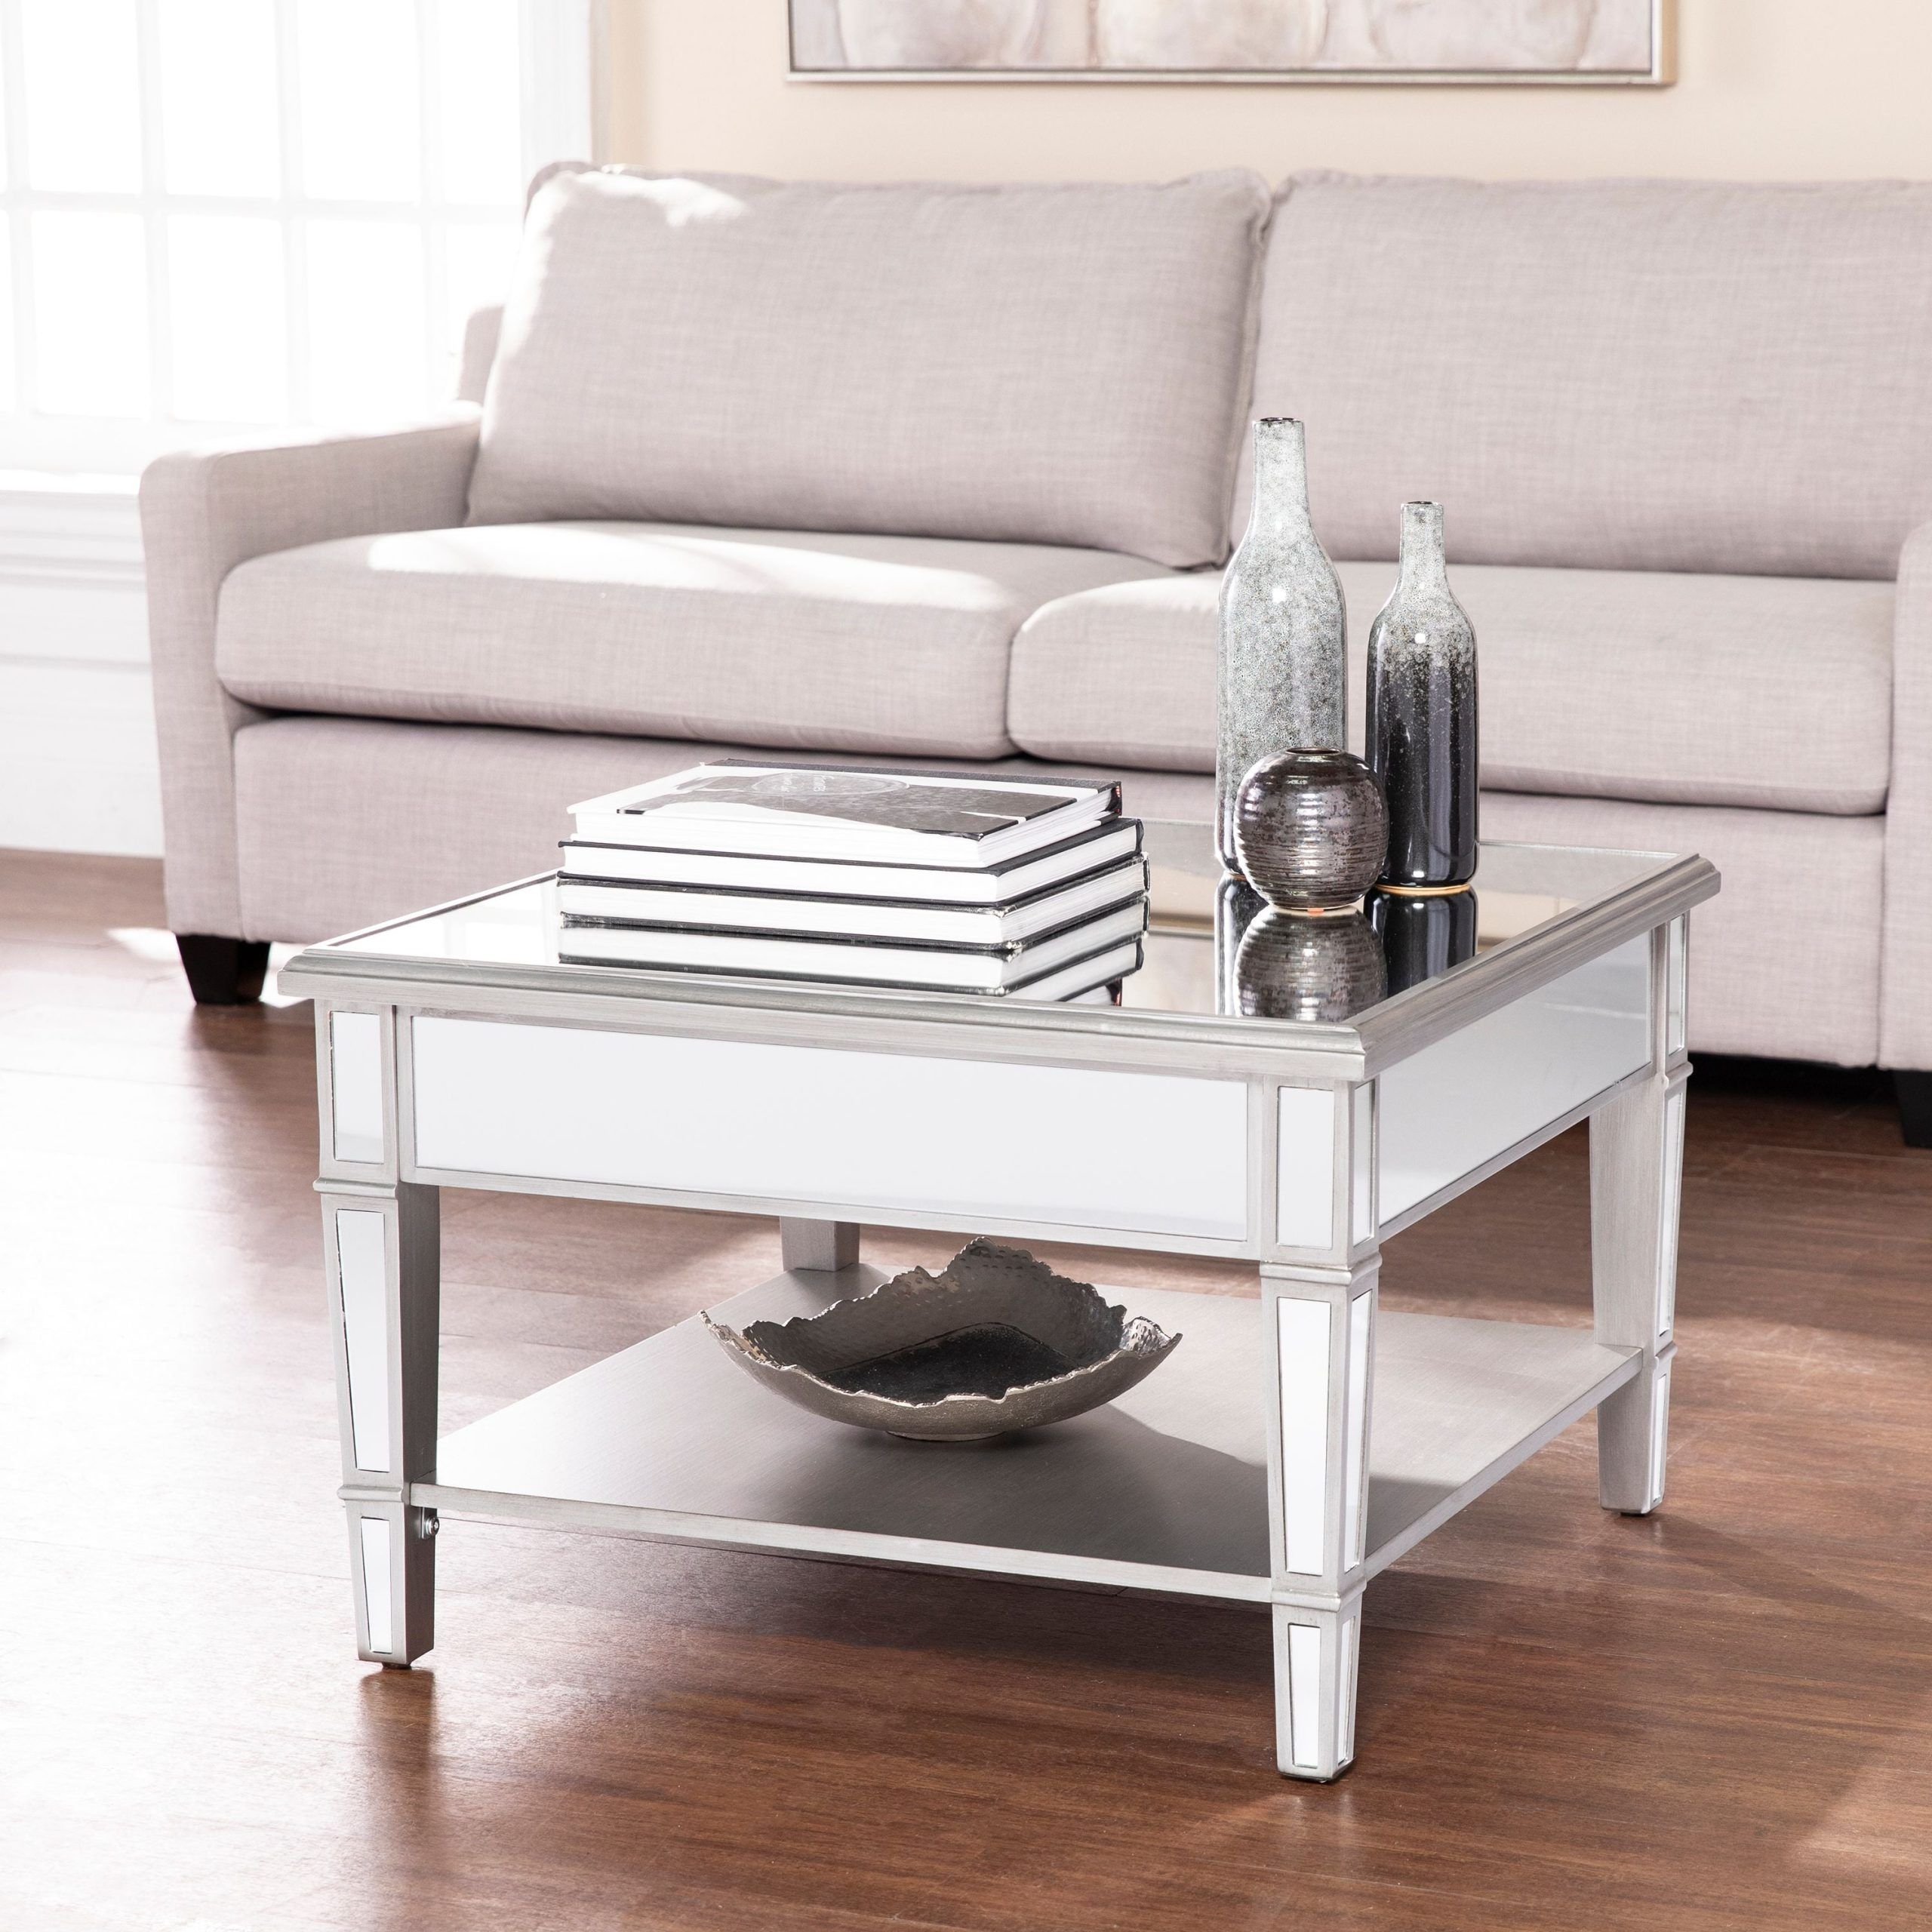 Ember Interiors Larksmill Mirrored Console Table, Silver – Walmart With Southern Enterprises Larksmill Coffee Tables (View 4 of 6)